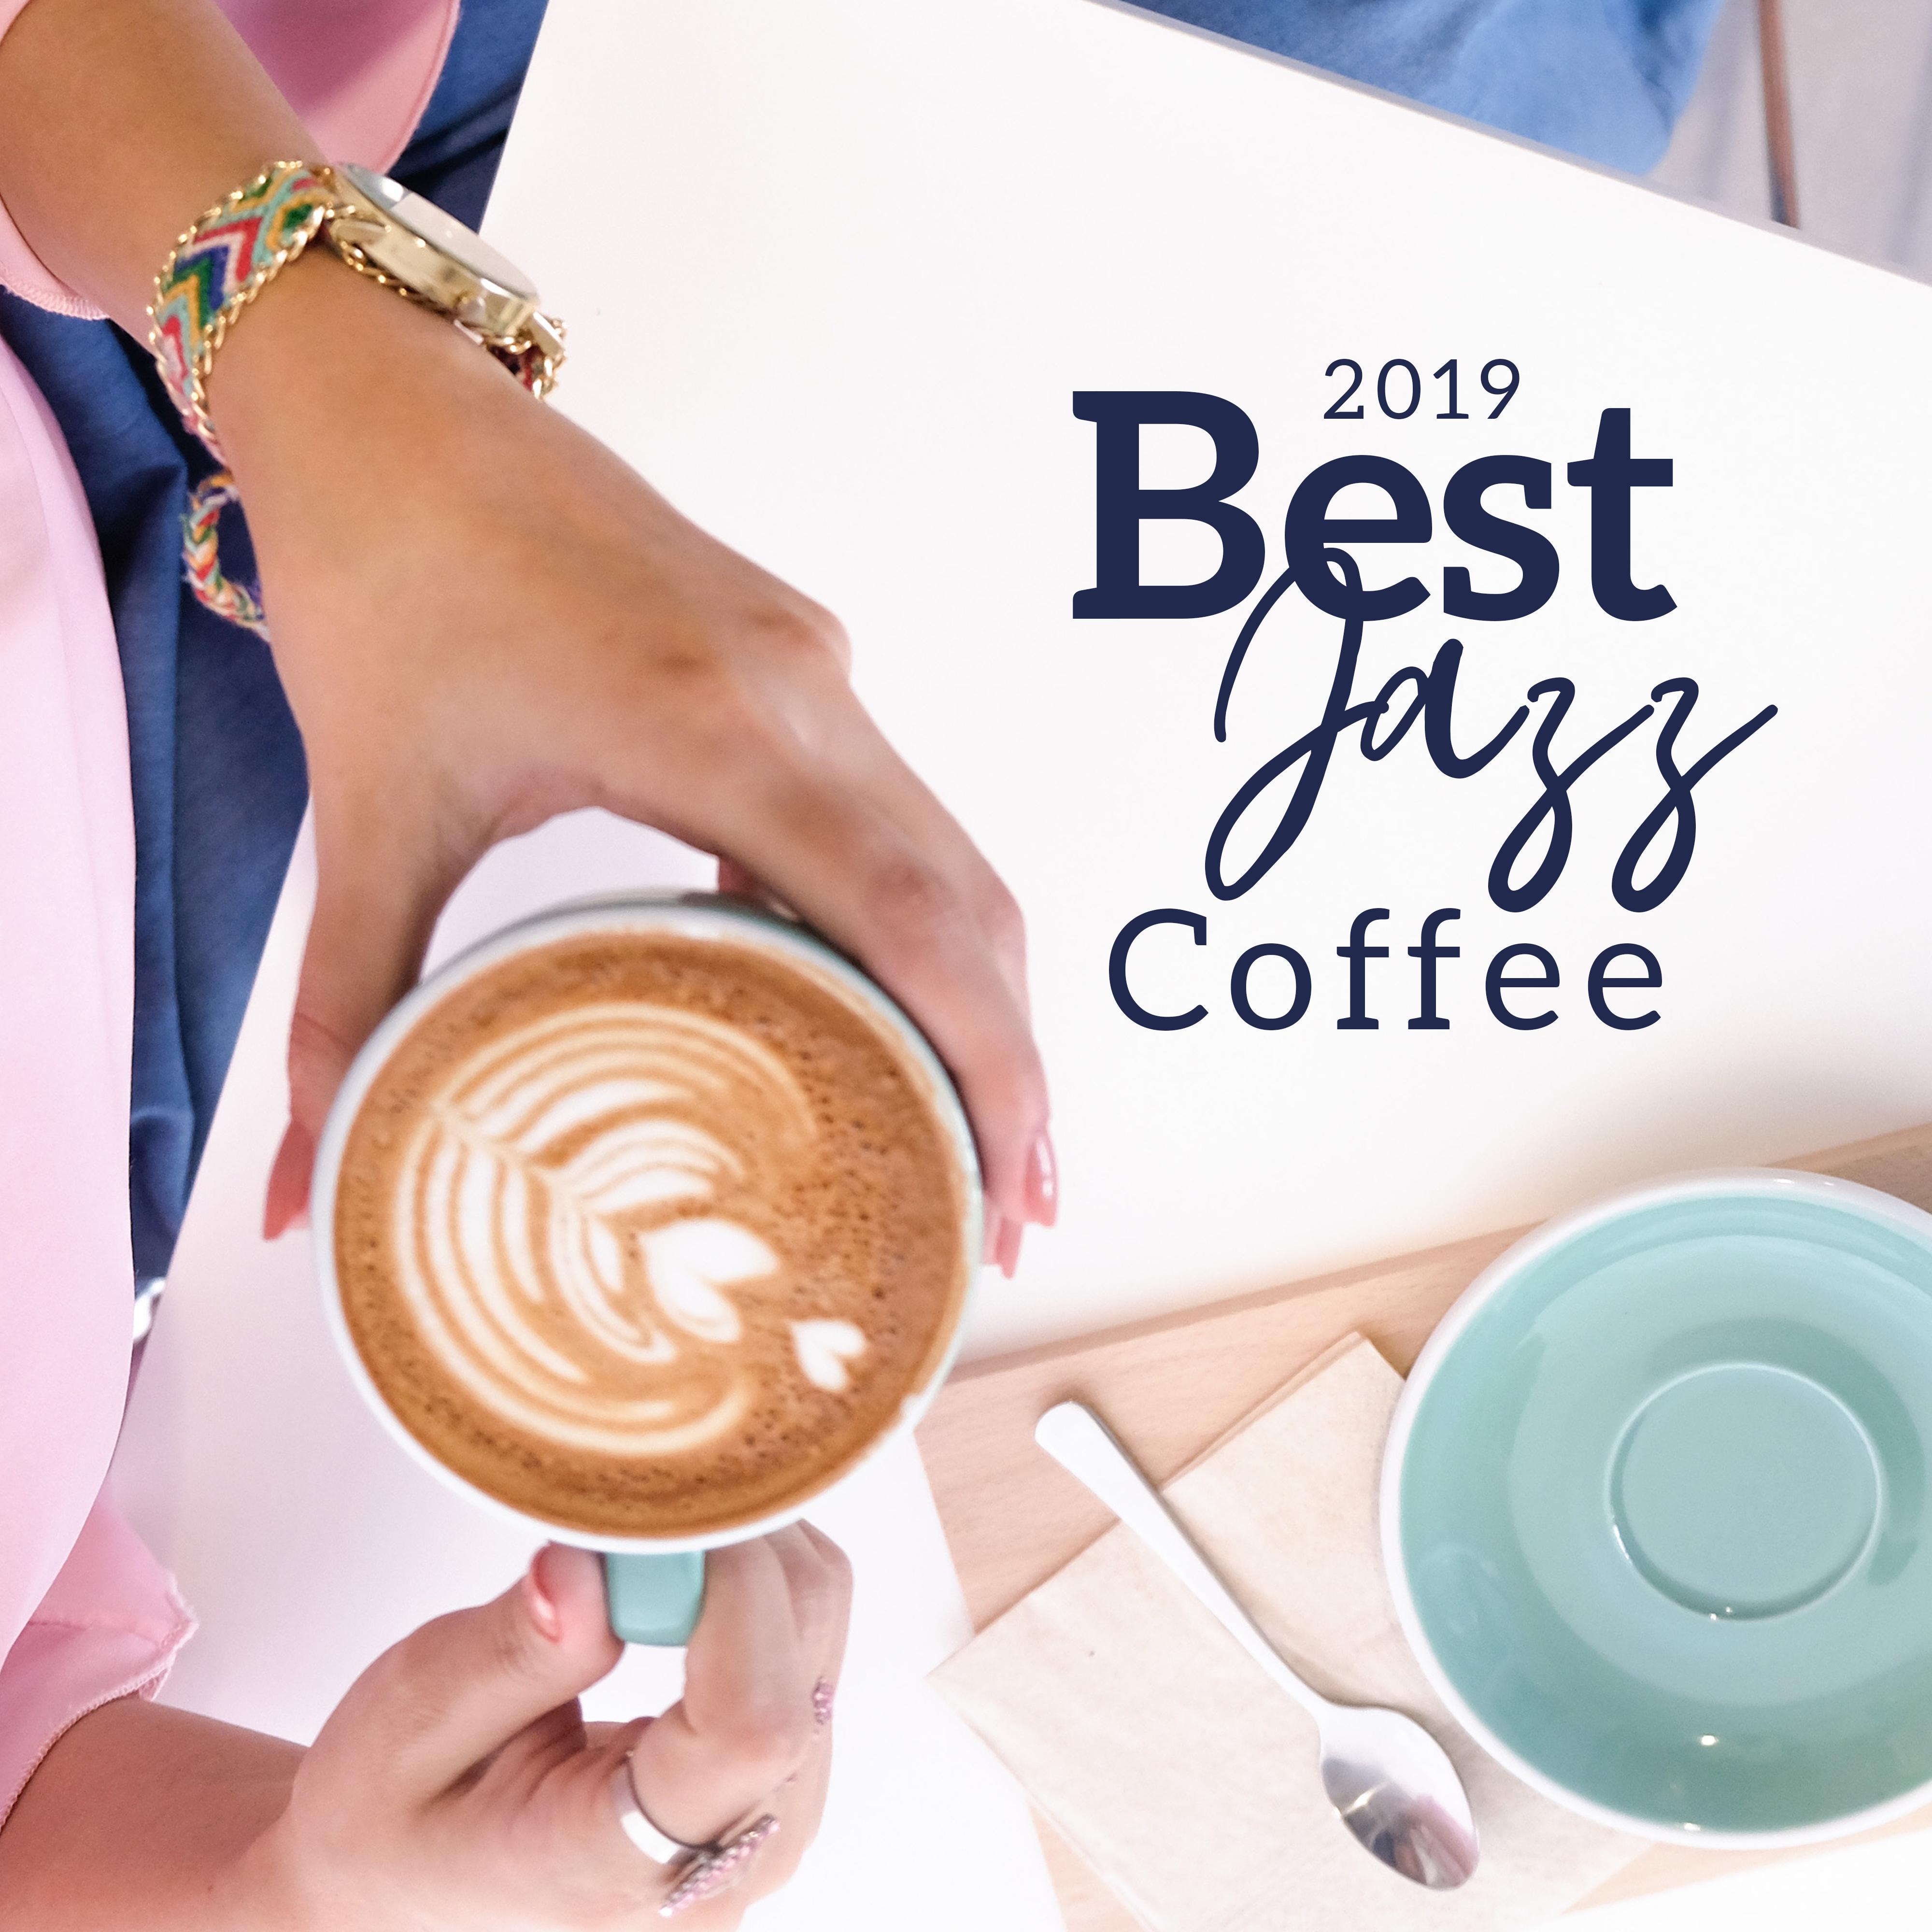 2019 Best Jazz Coffee  Ambient Jazz Collection 2019, Restaurant Jazz, Smooth Music for Coffee, Chilled Background Jazz, Parisian Coffee, Relaxing Jazz